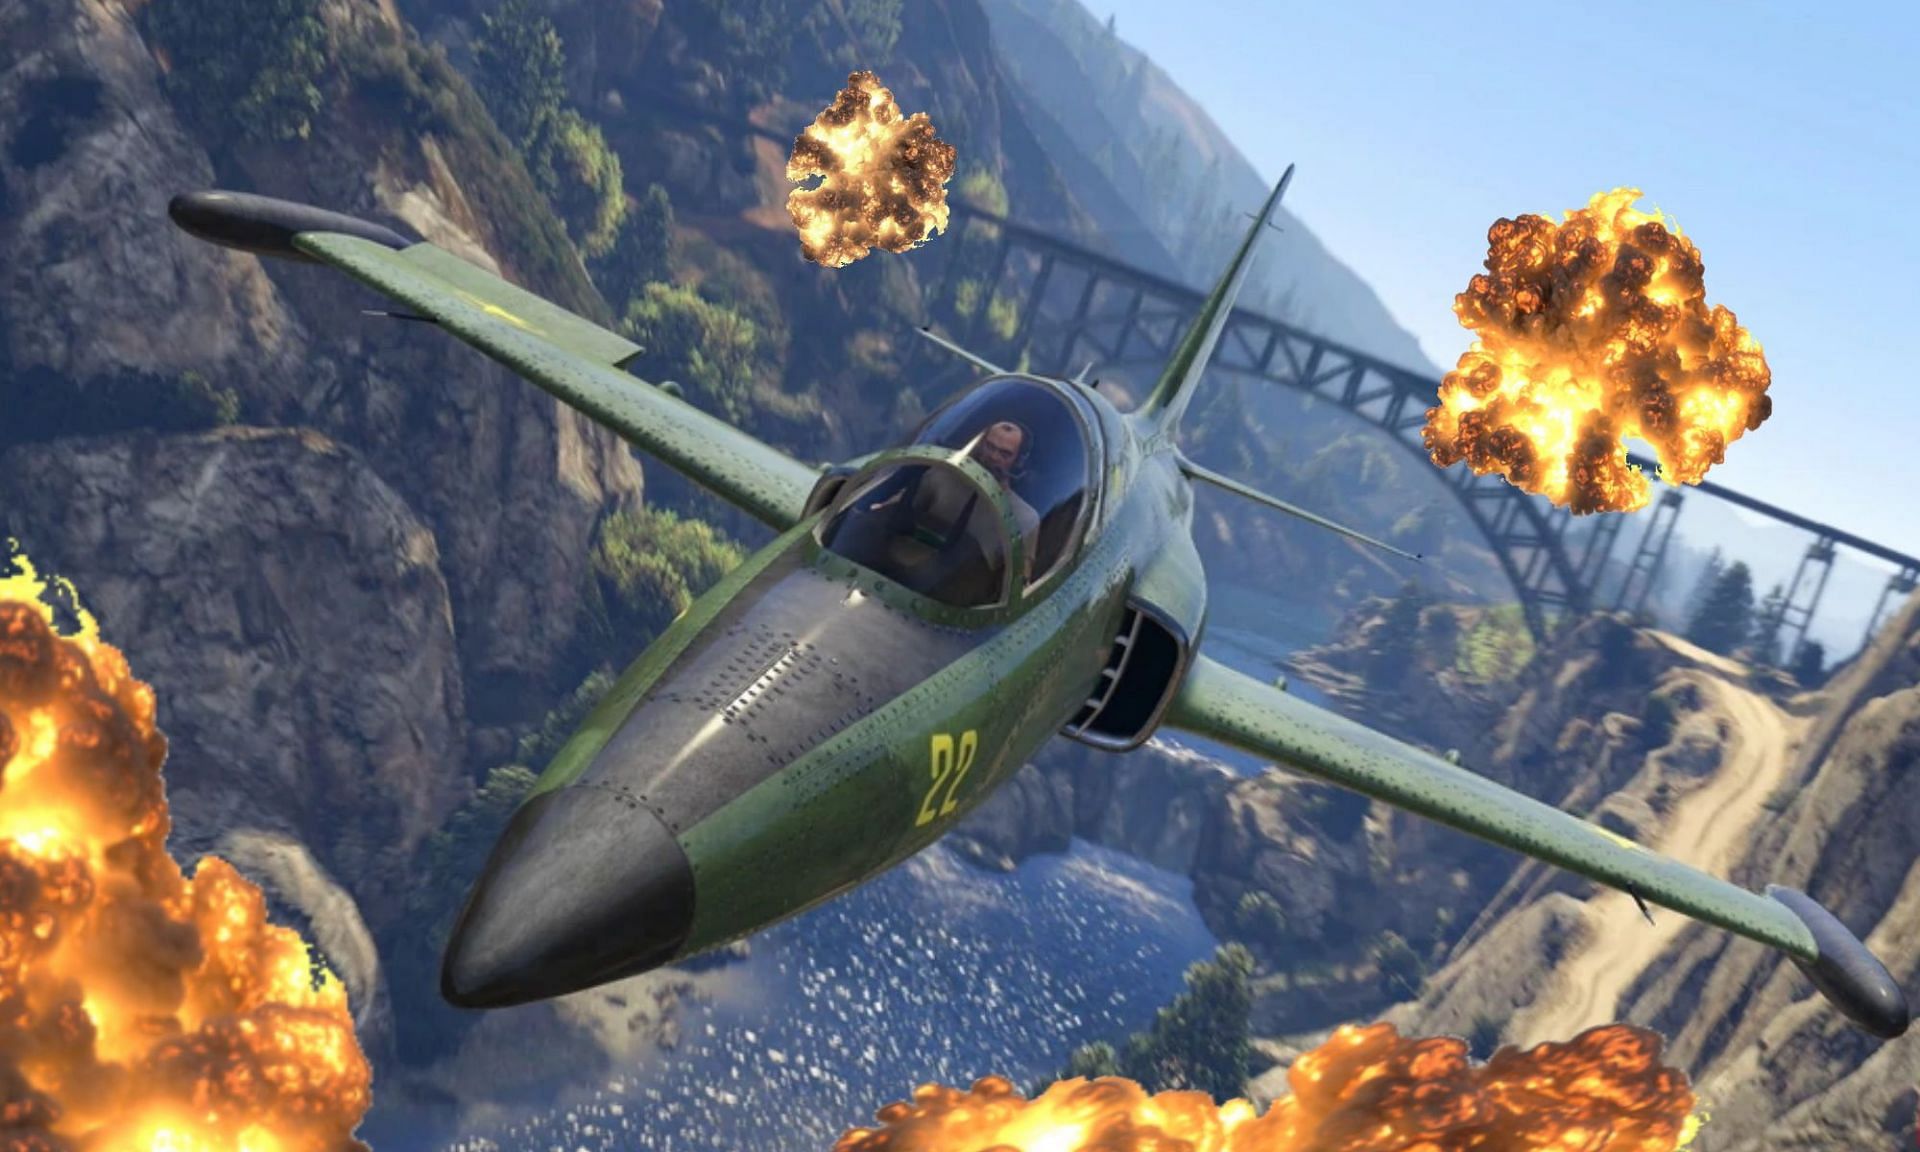 GTA Online players will likely pull their hair out with this mission (Image via Sportskeeda)